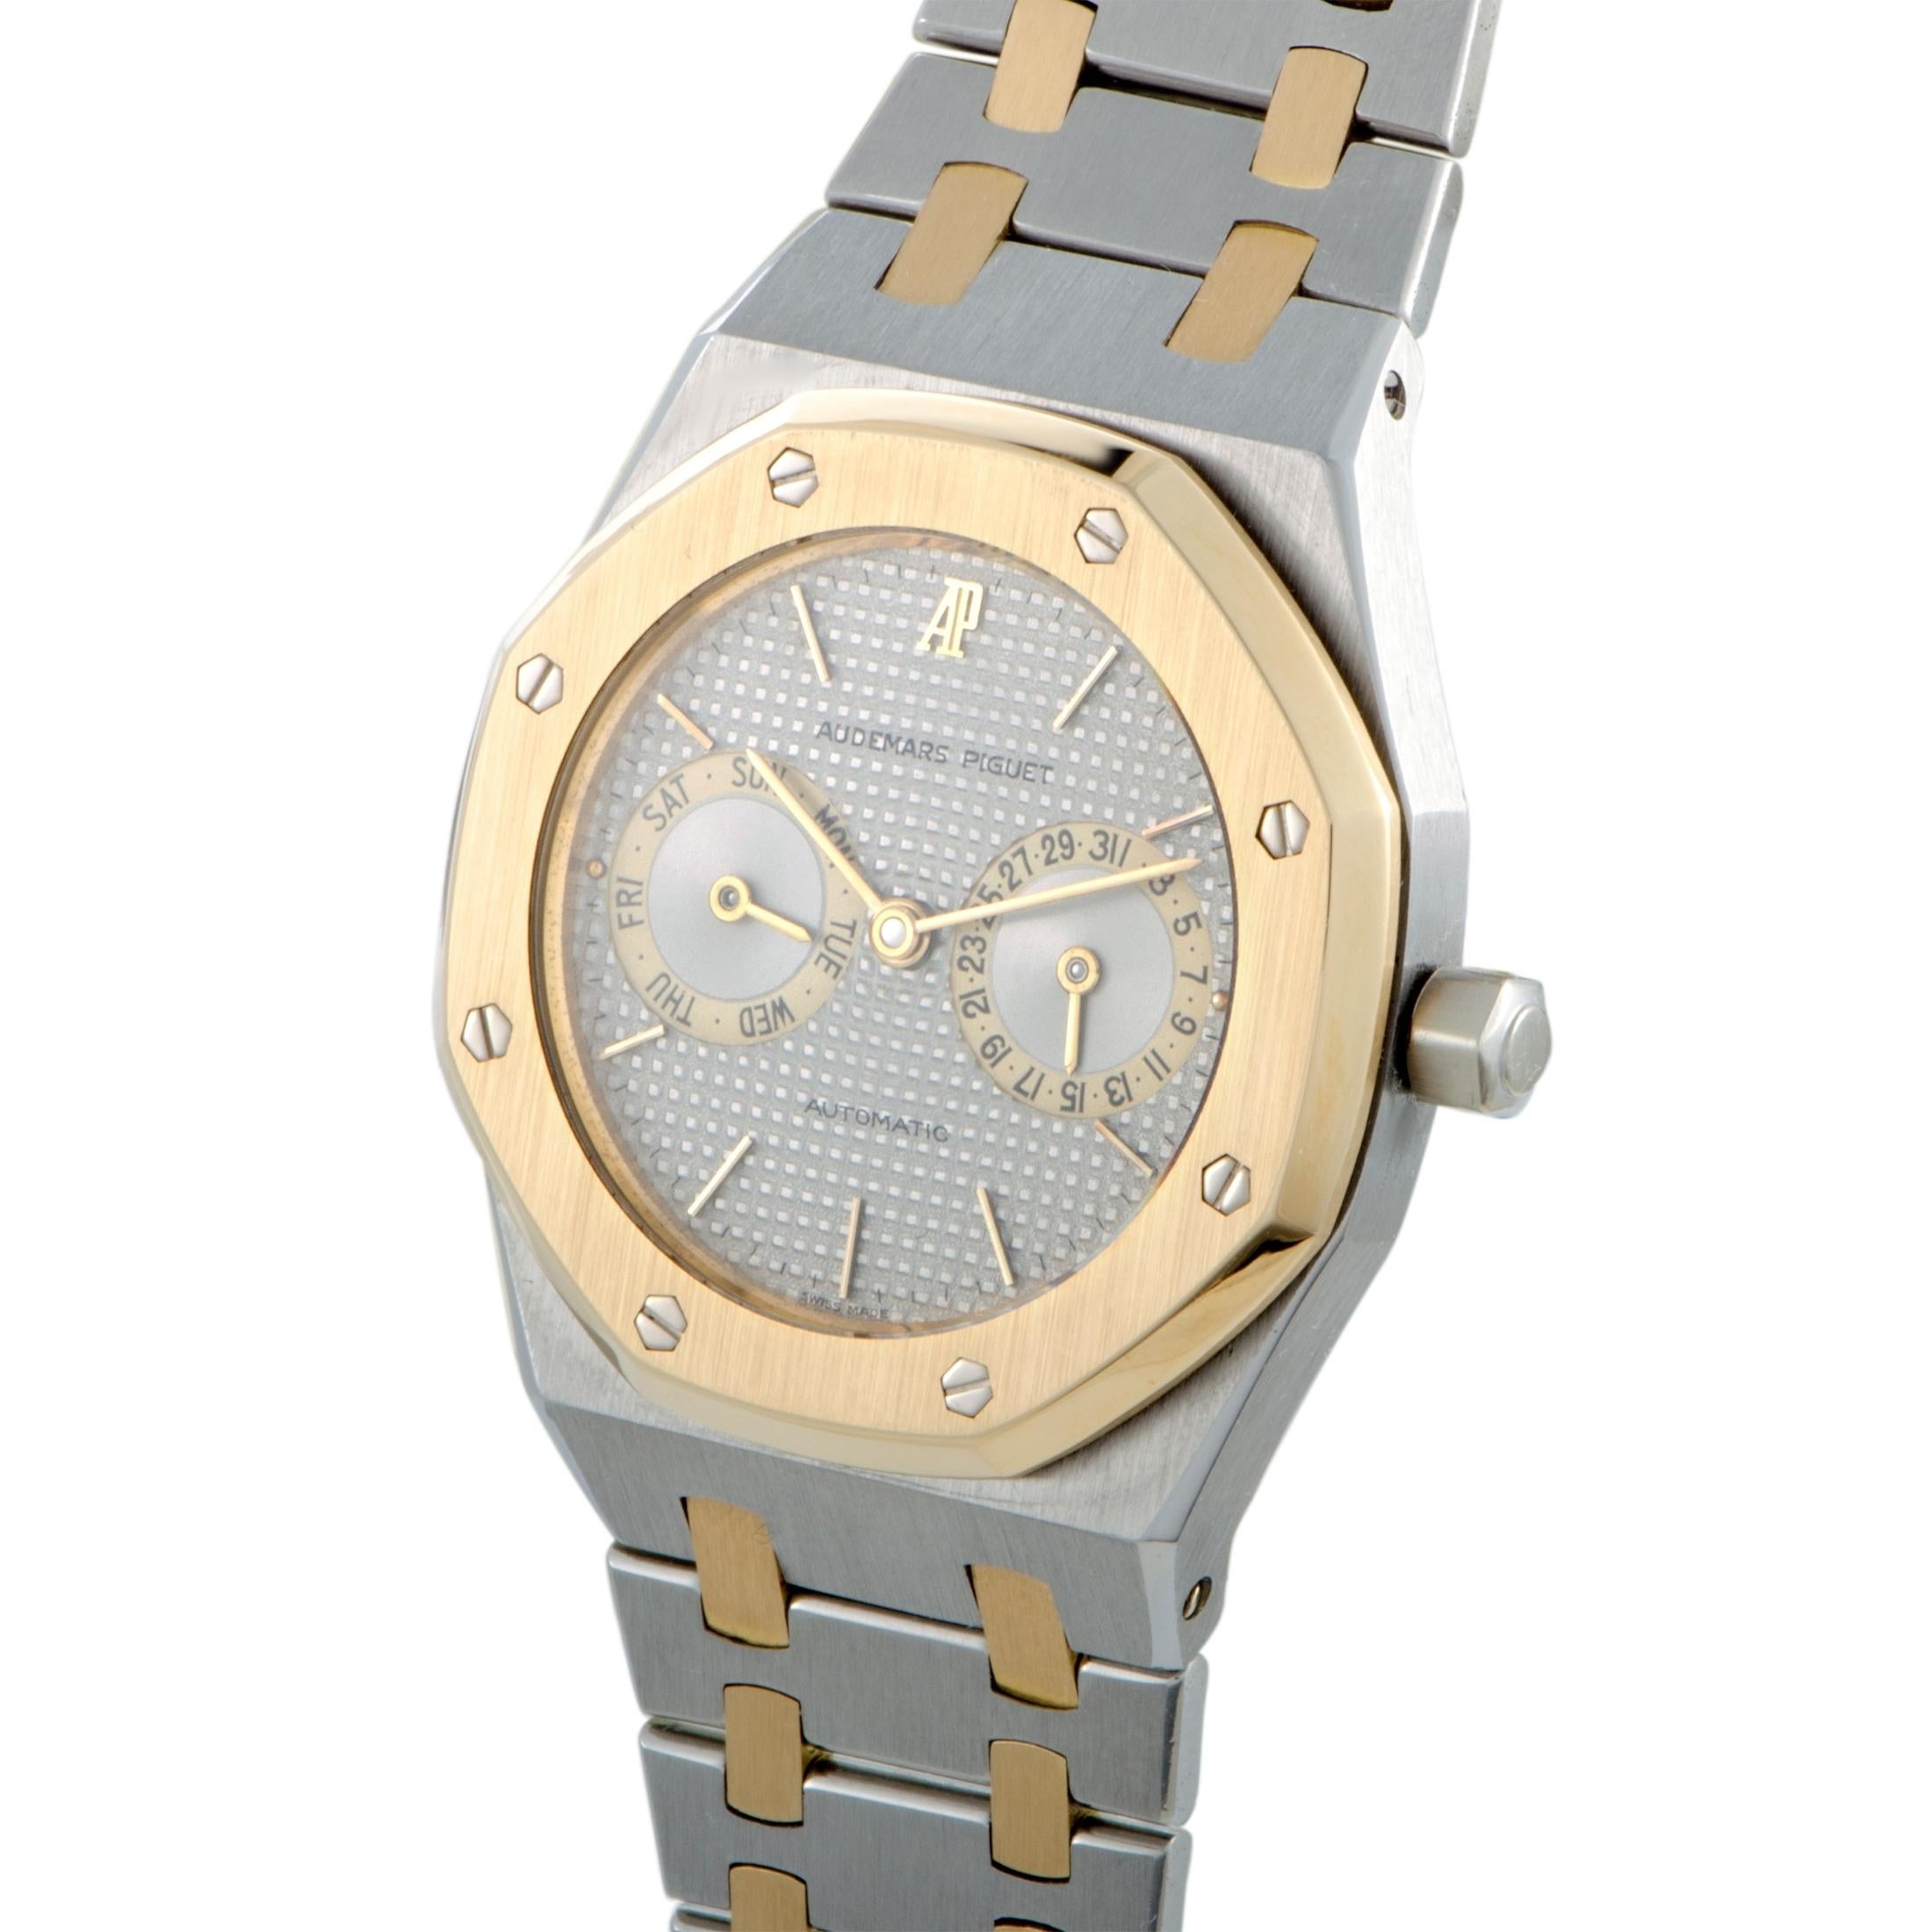 The slick aesthetic style and robust reliability of the legendary “Royal Oak” design are brilliantly embodied in this sublime timepiece from Audemars Piguet which presents its numerous useful indications in a highly legible, superbly accurate, and